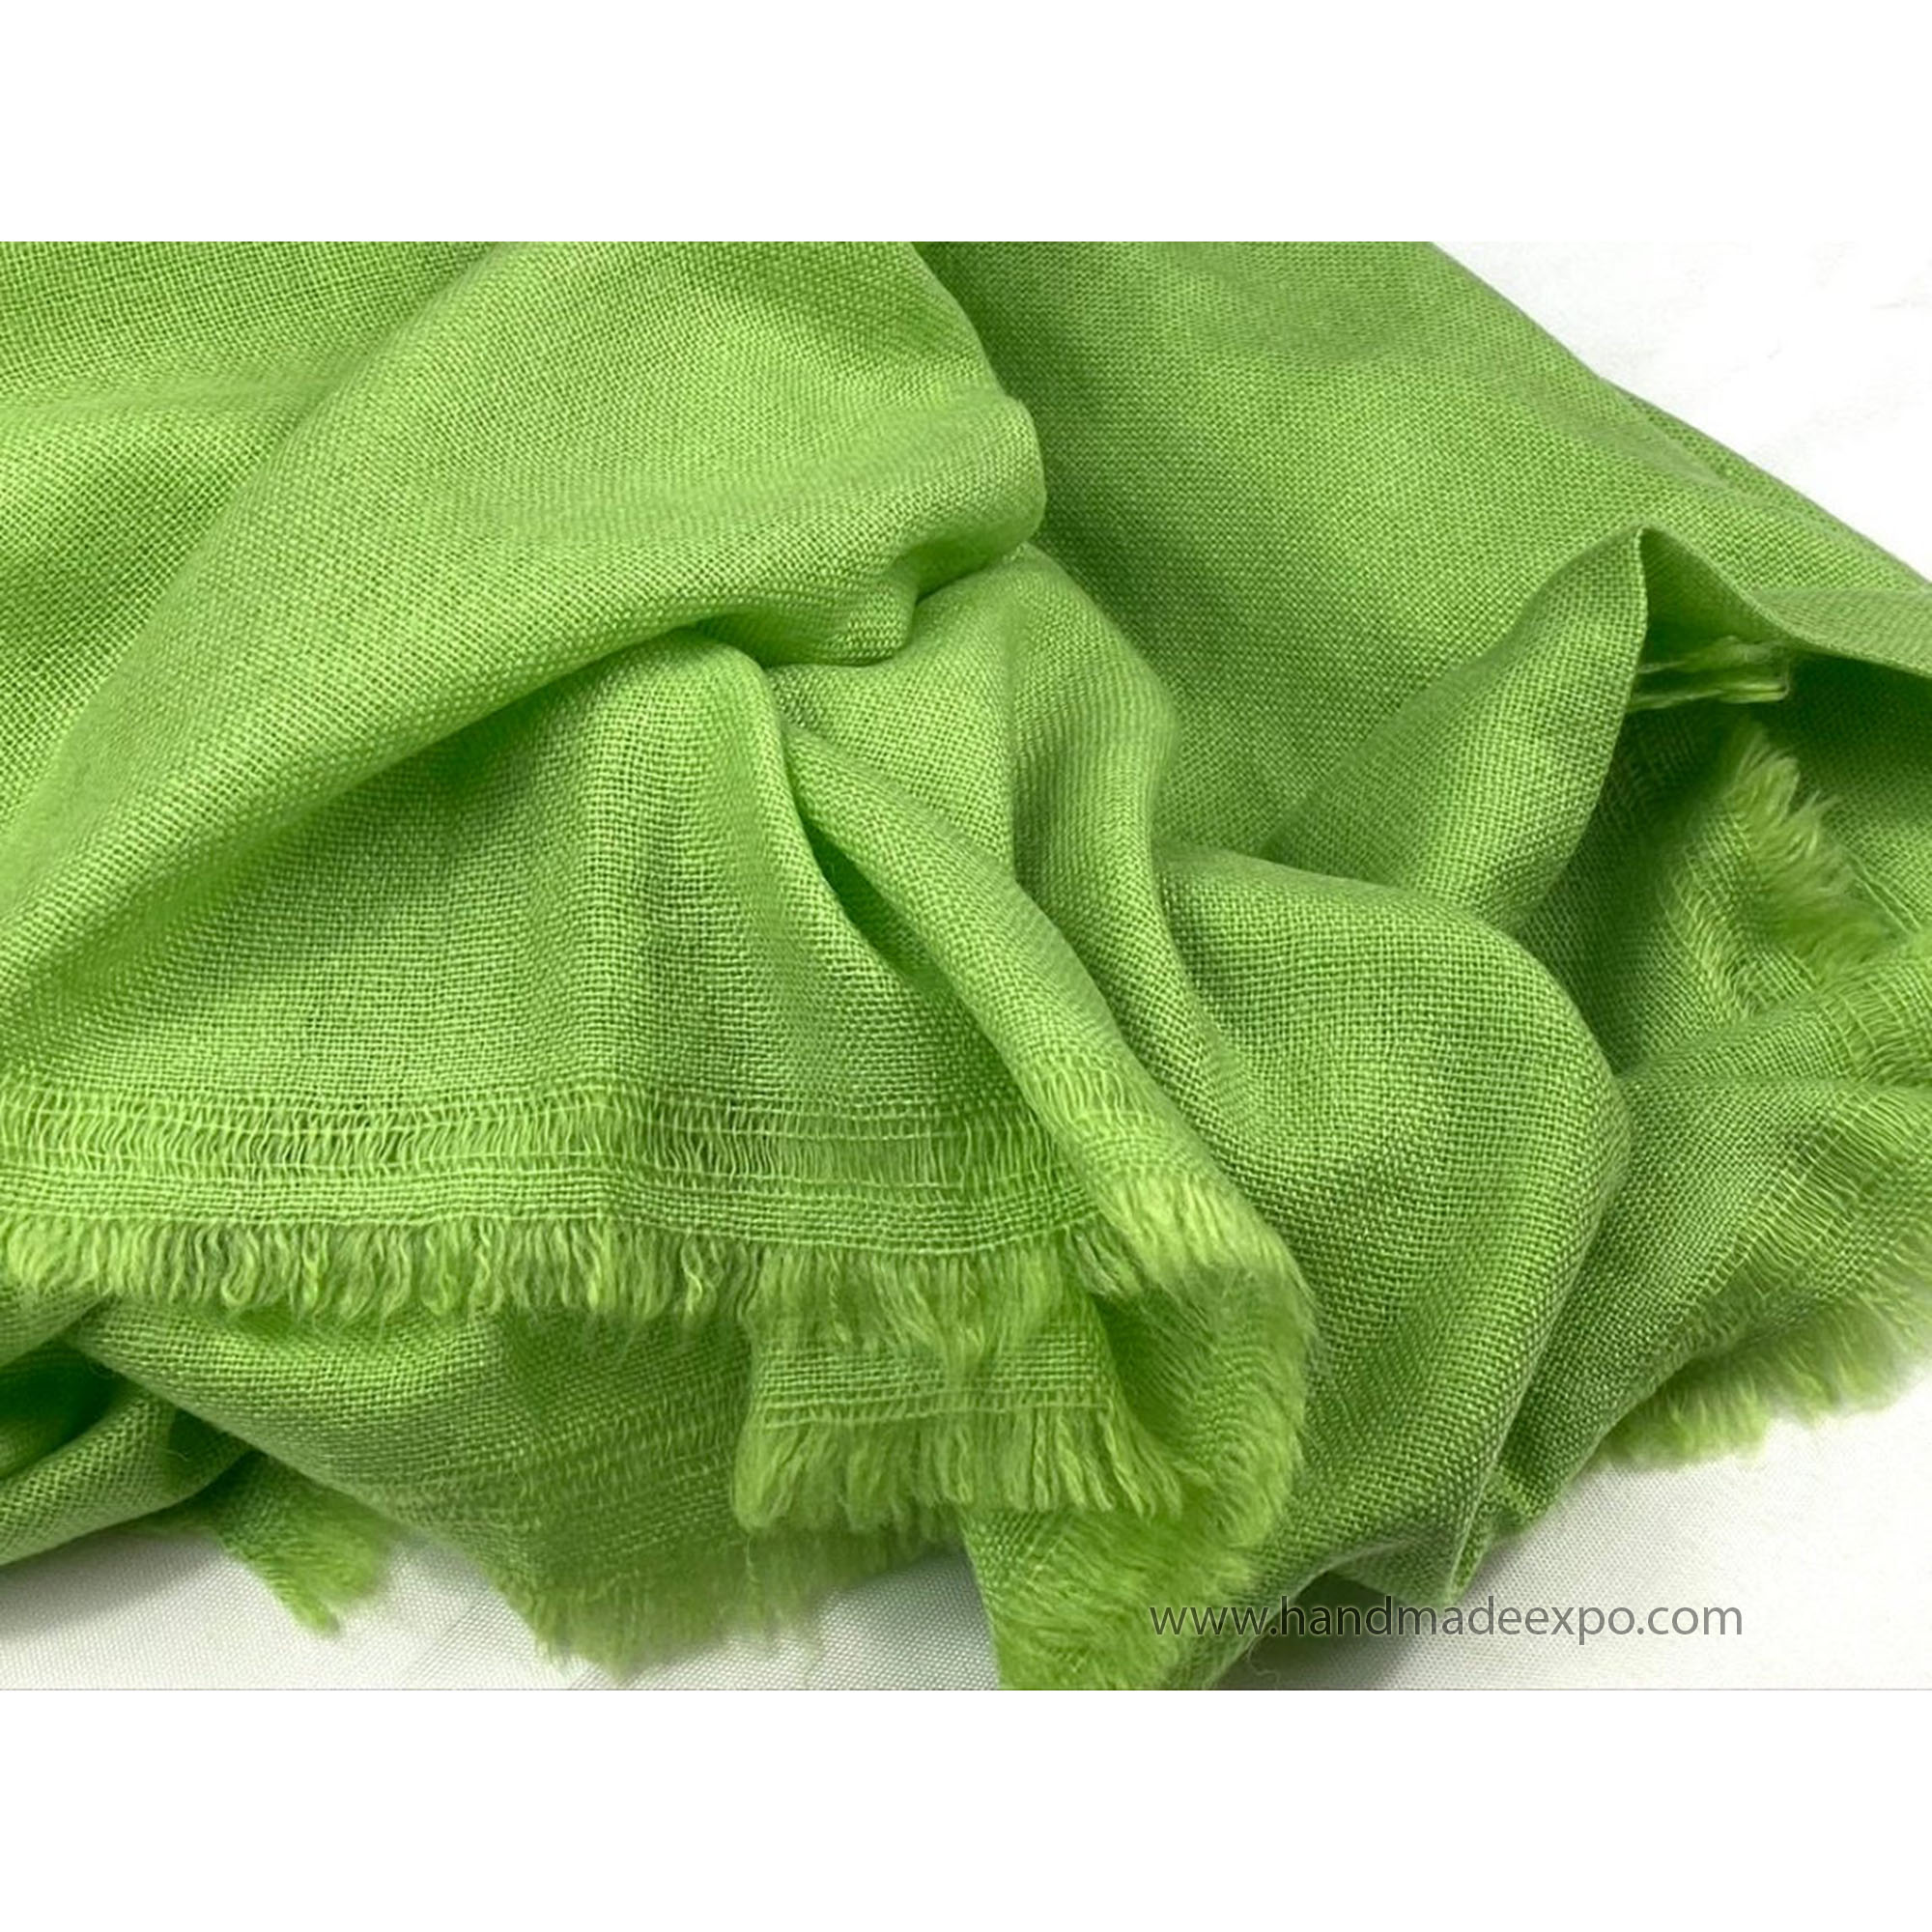 Pashmina Shawl, Nepali Handmade Shawl, In Four Ply Wool, Color Dye parrot Green Color